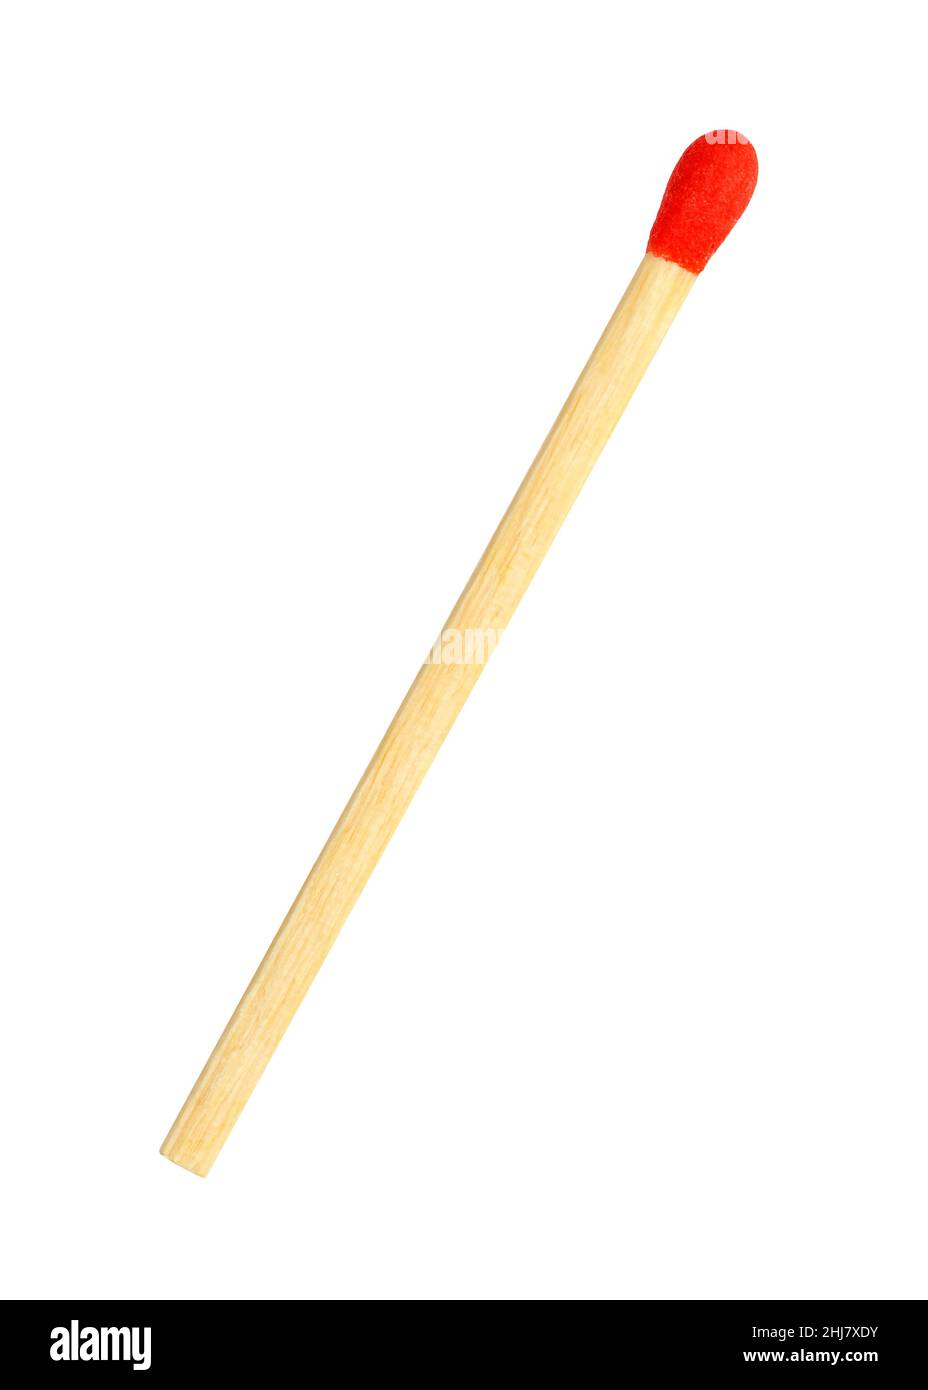 Matchstick Against White Background, Close Up Stock Photo